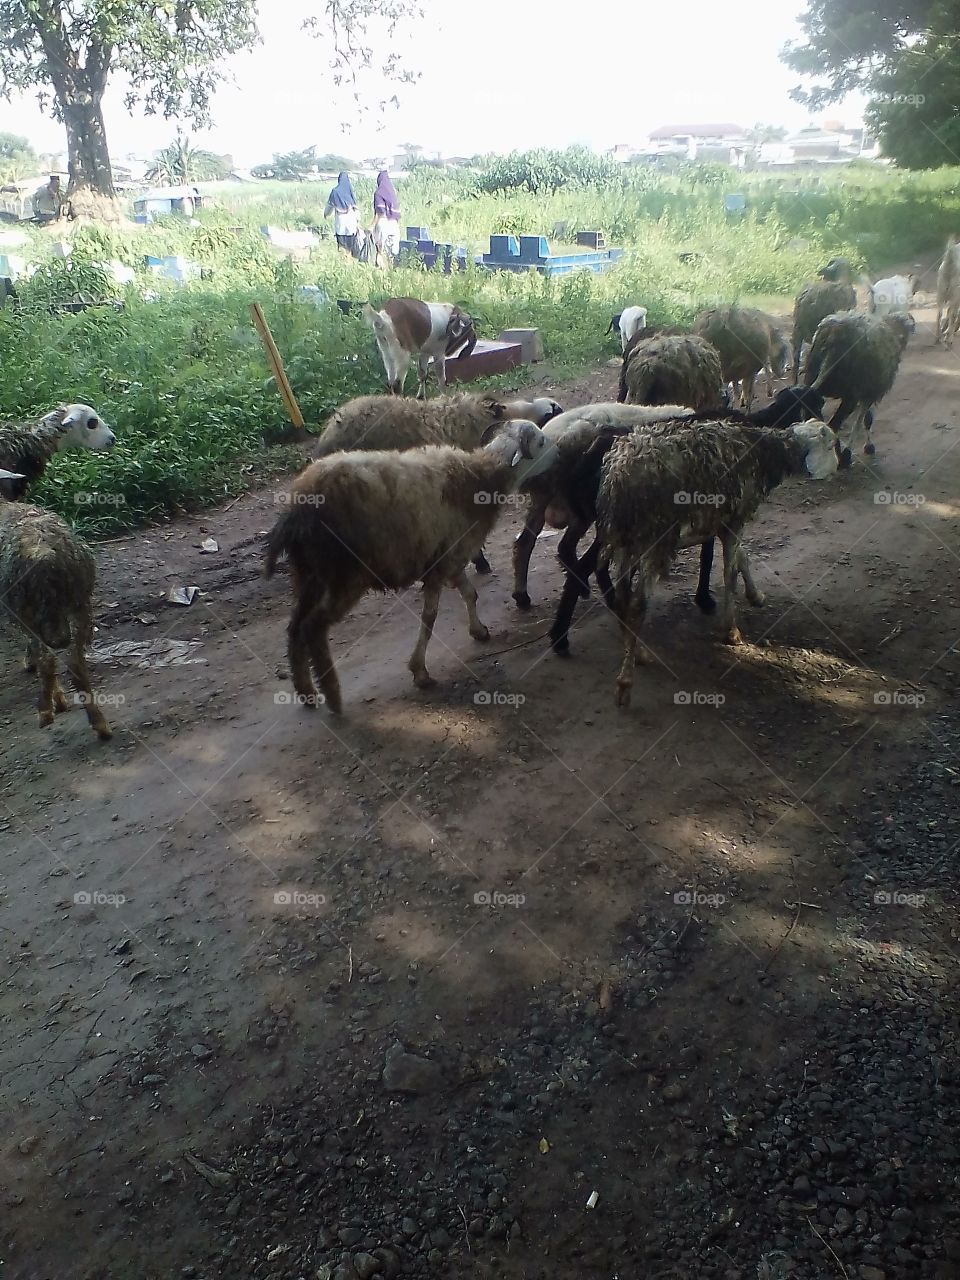 A herd of sheep walked hand in hand towards the meadow in the park